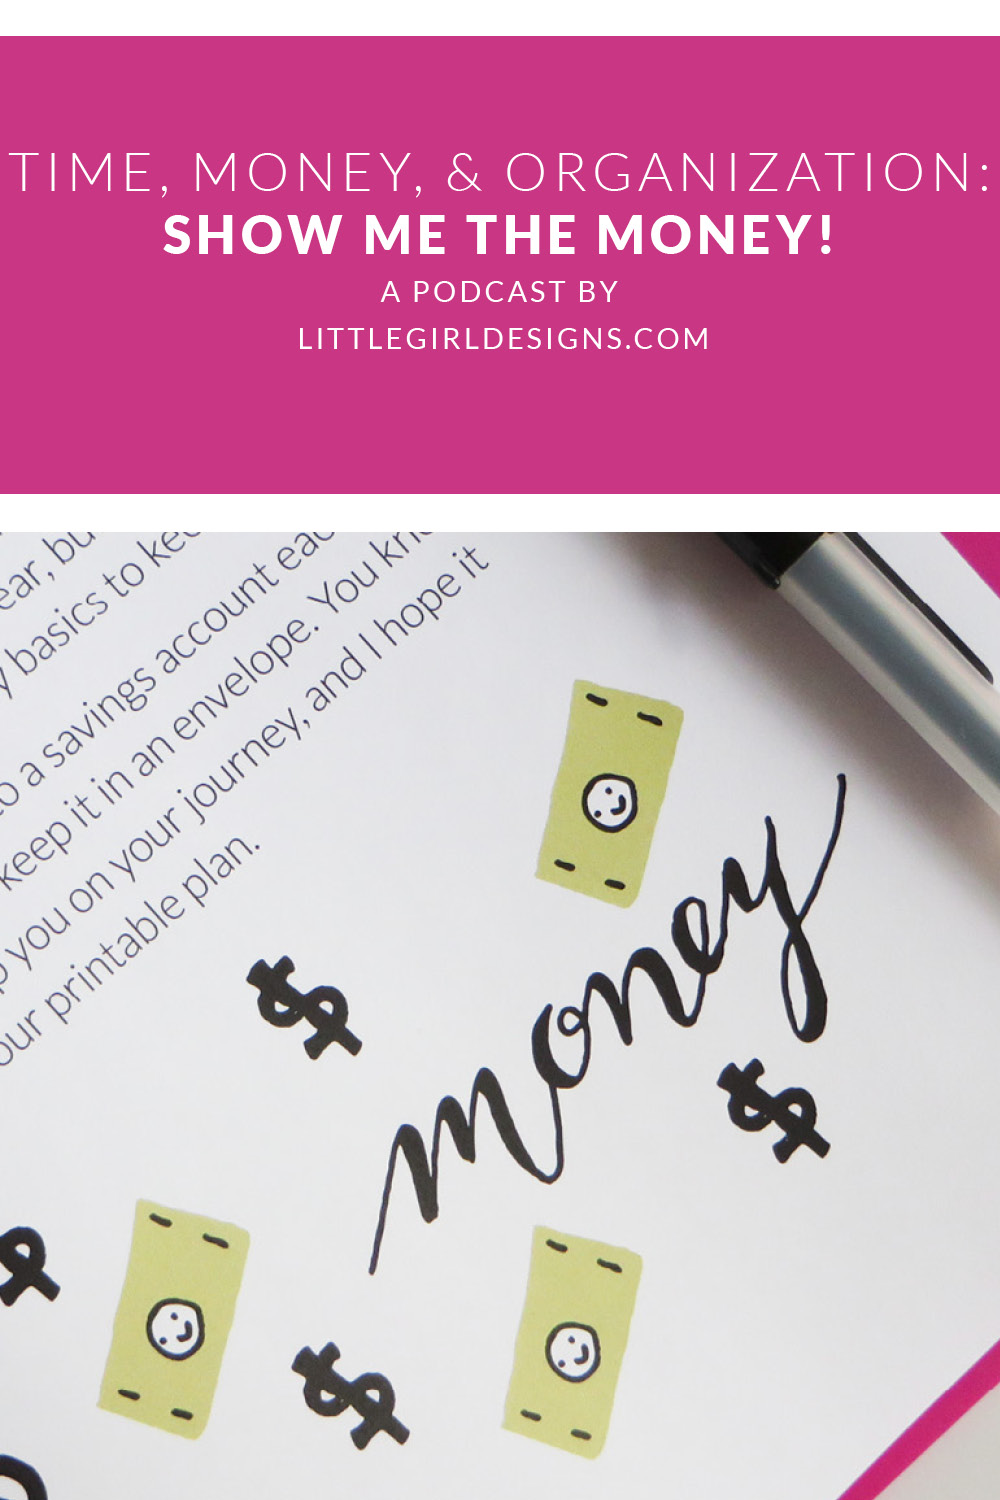 Time, Money, and Organization - Show me the Money (for crafts!) - Are you frustrated because you never have enough money for craft or creative projects? Well, you're not alone. In this podcast episode, I'll share some thoughts about how to save and earn a bit of craft cash as well as talk about some deeper issues regarding money. You won't want to miss it! via littlegirldesigns.com